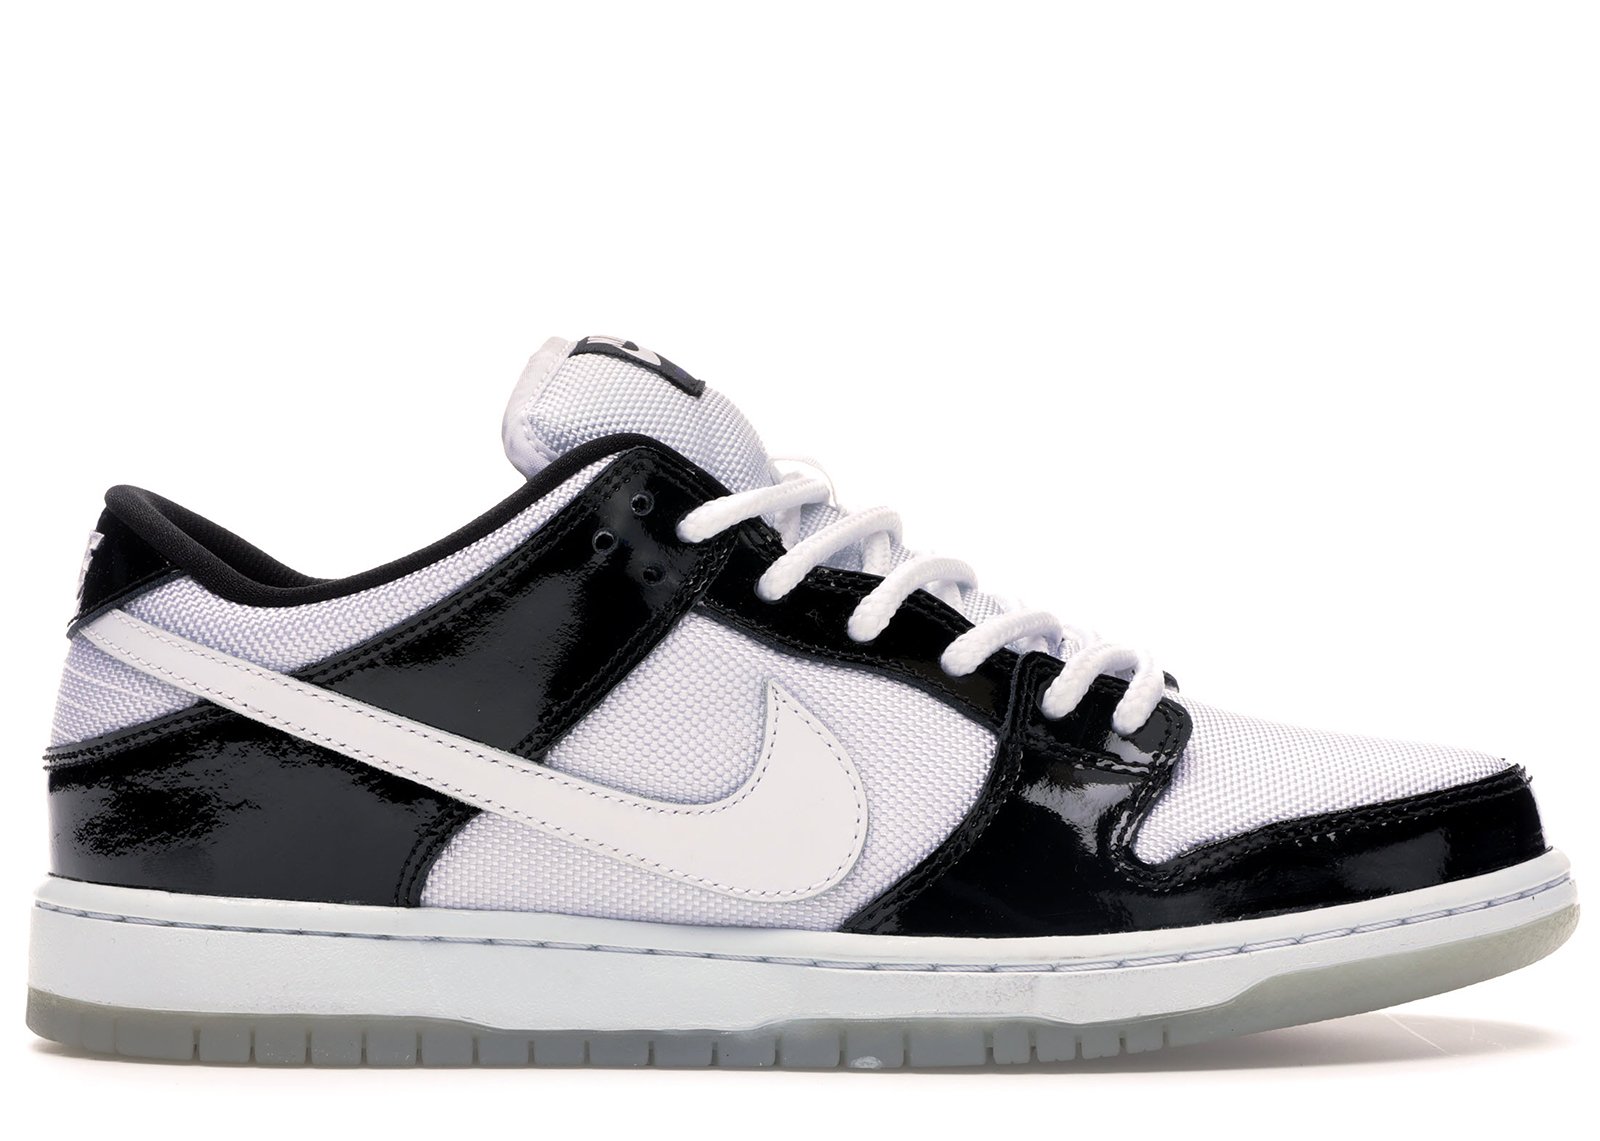 Nike SB Dunk Low Concord sneakers